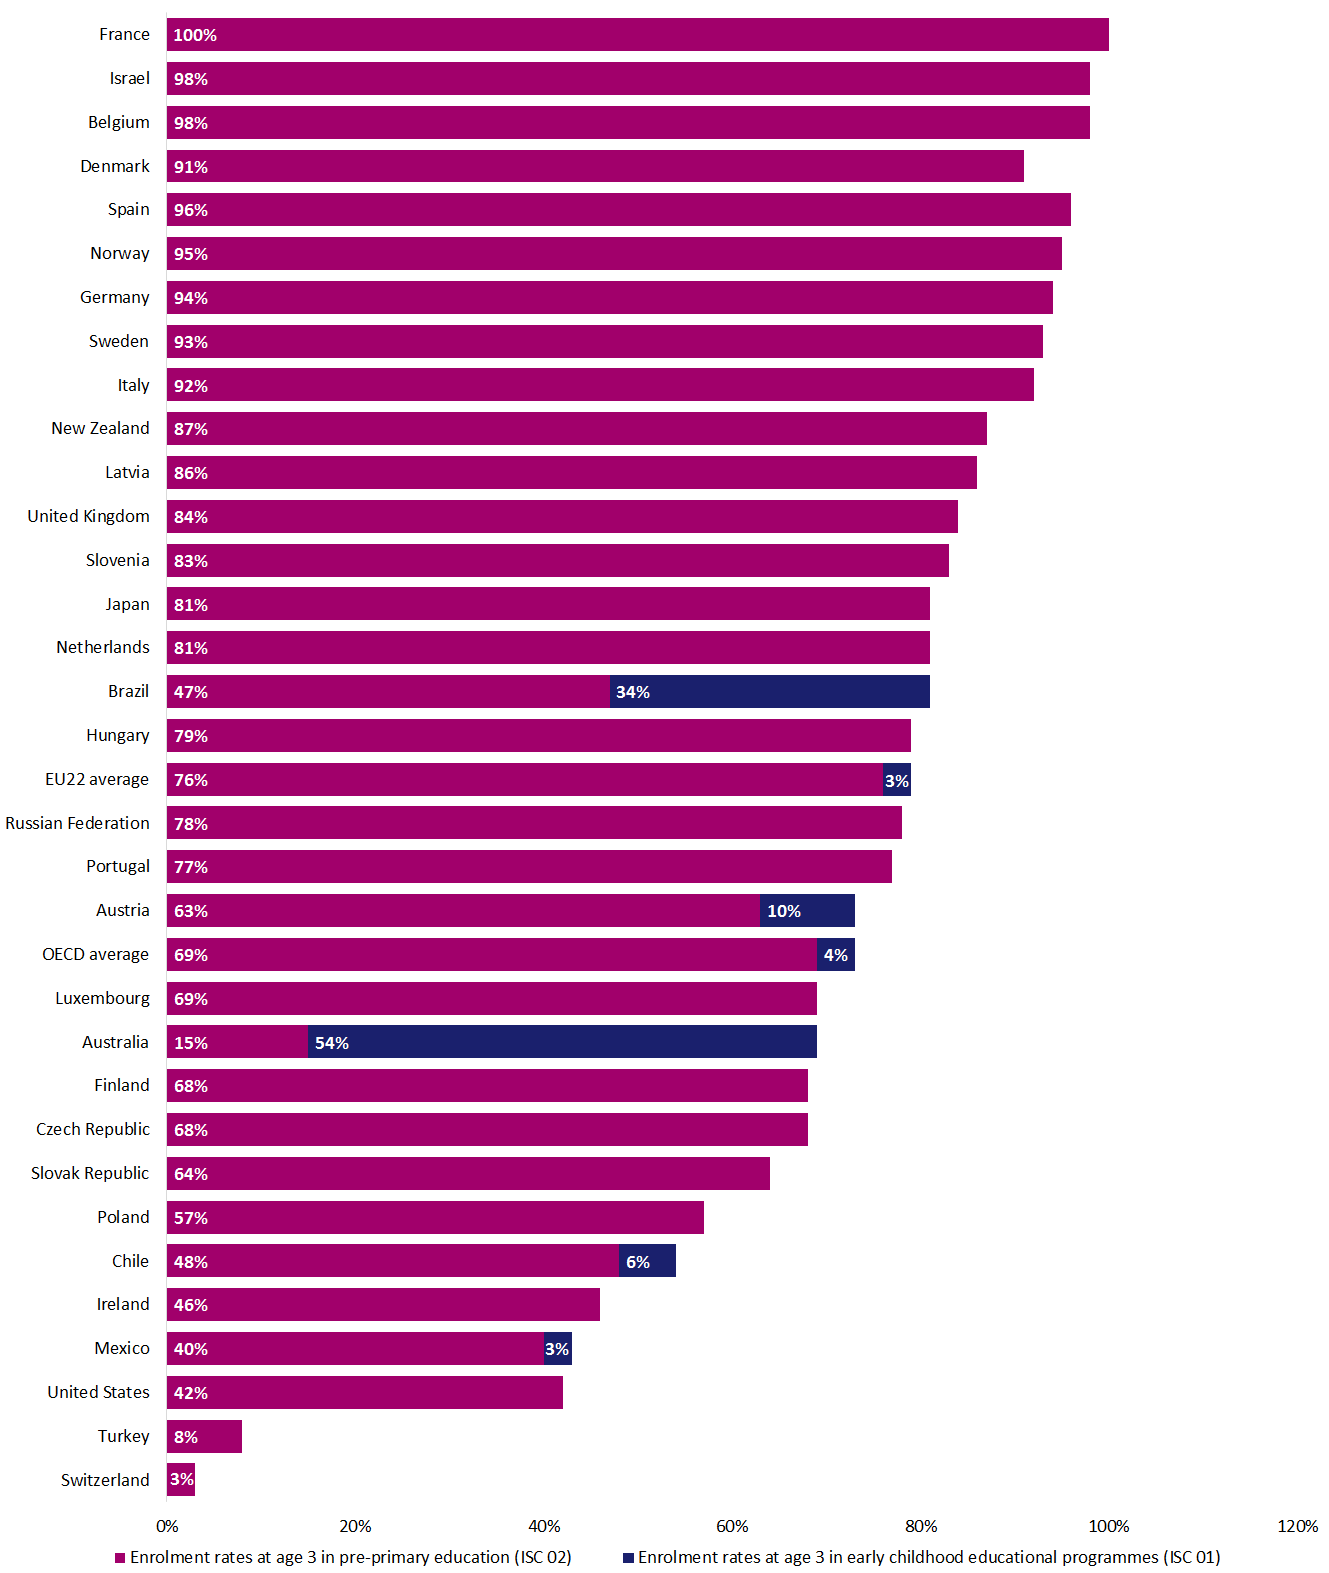 Early childhood enrolment rates in OECD countries graph